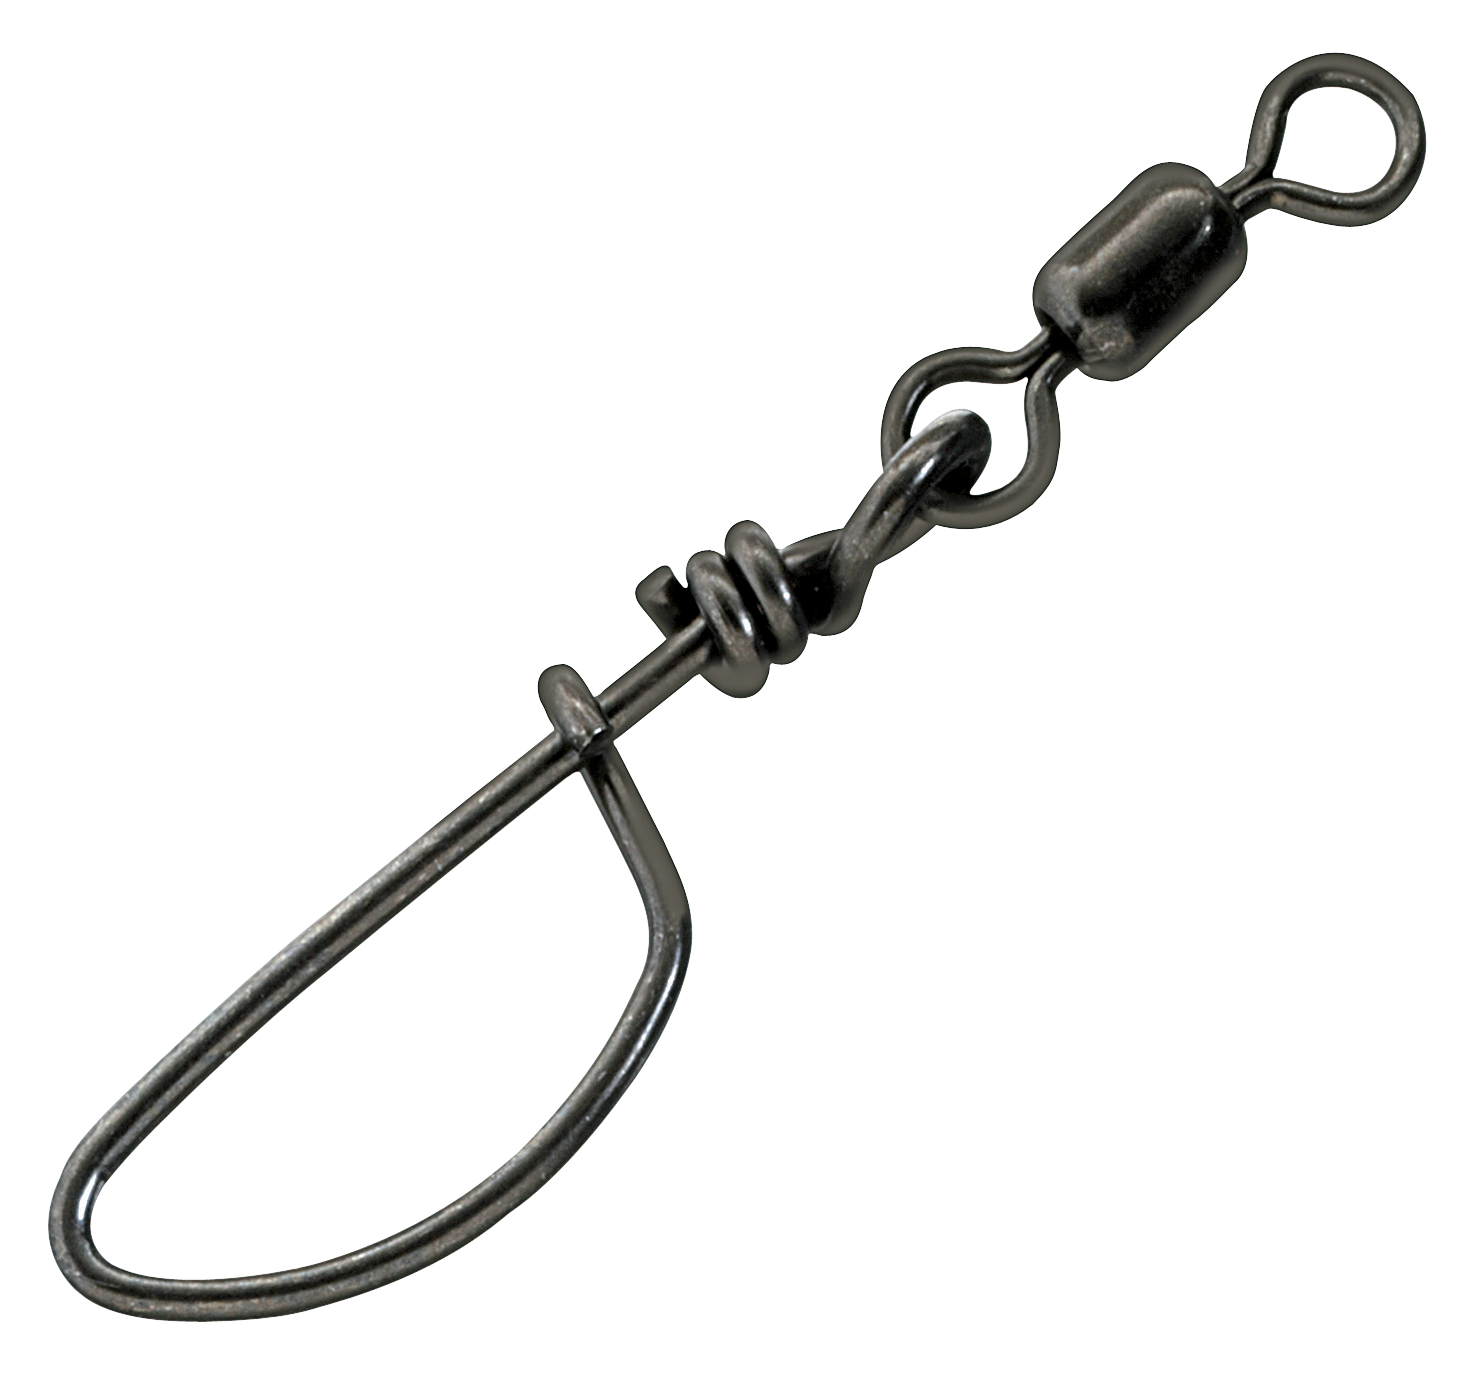 Offshore Angler Extreme Stainless Steel Tournament Snap Swivels - Black